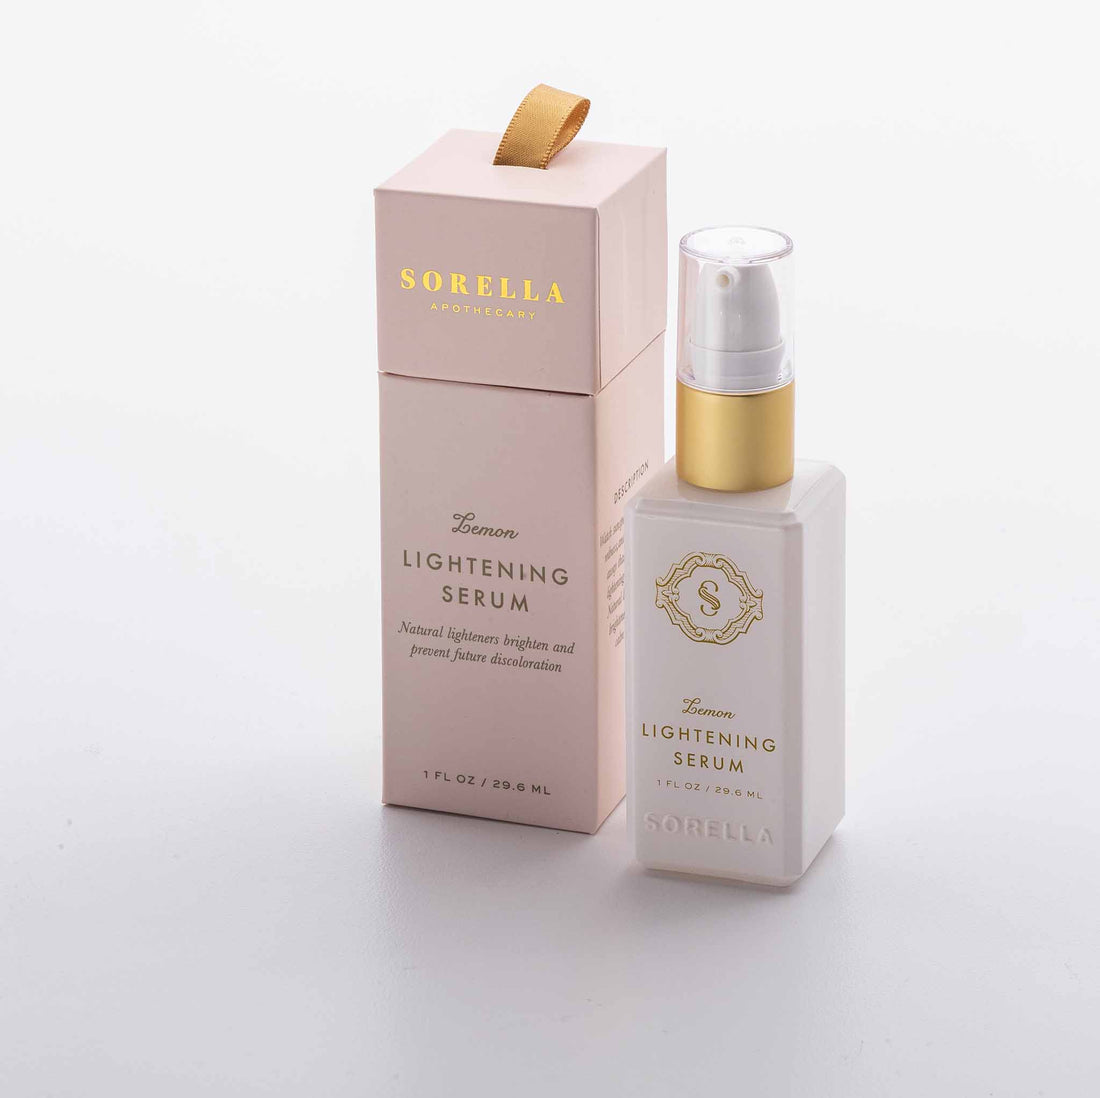 Lemon Lightening Serum has natural lighteners and skin brighteners that leave you with calm and even skin